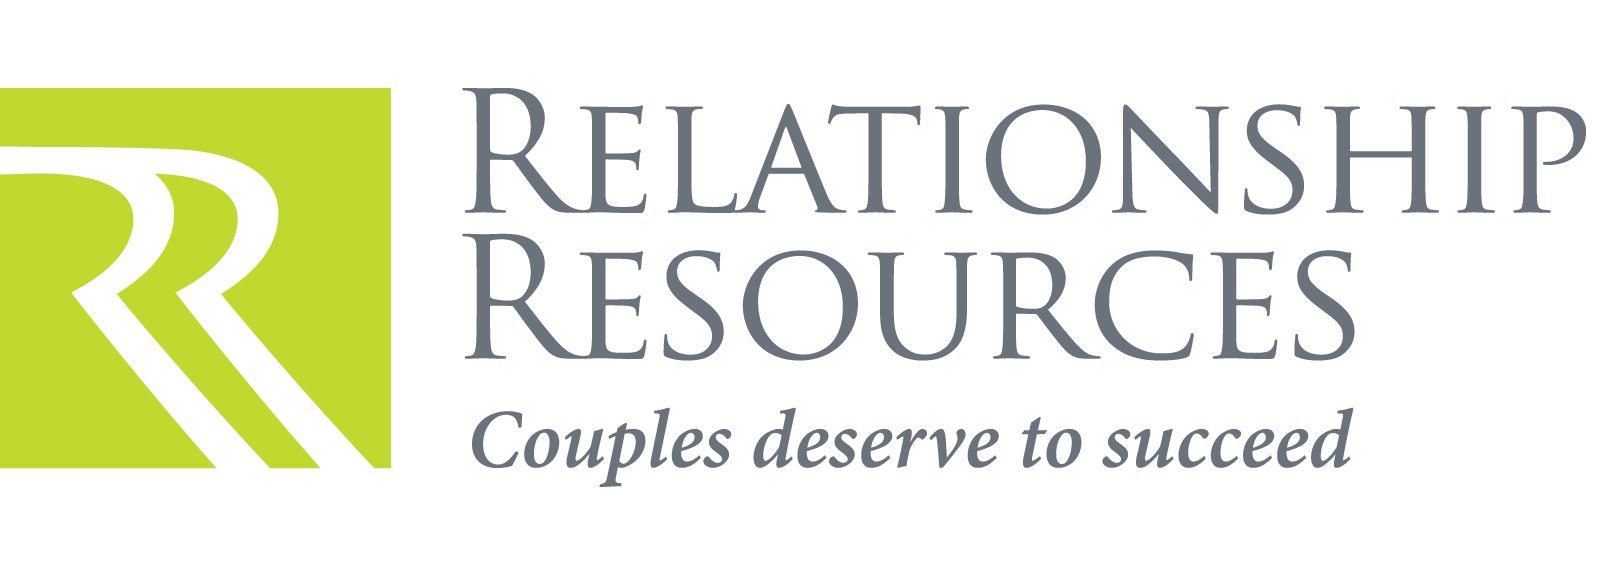 Relationship Resources